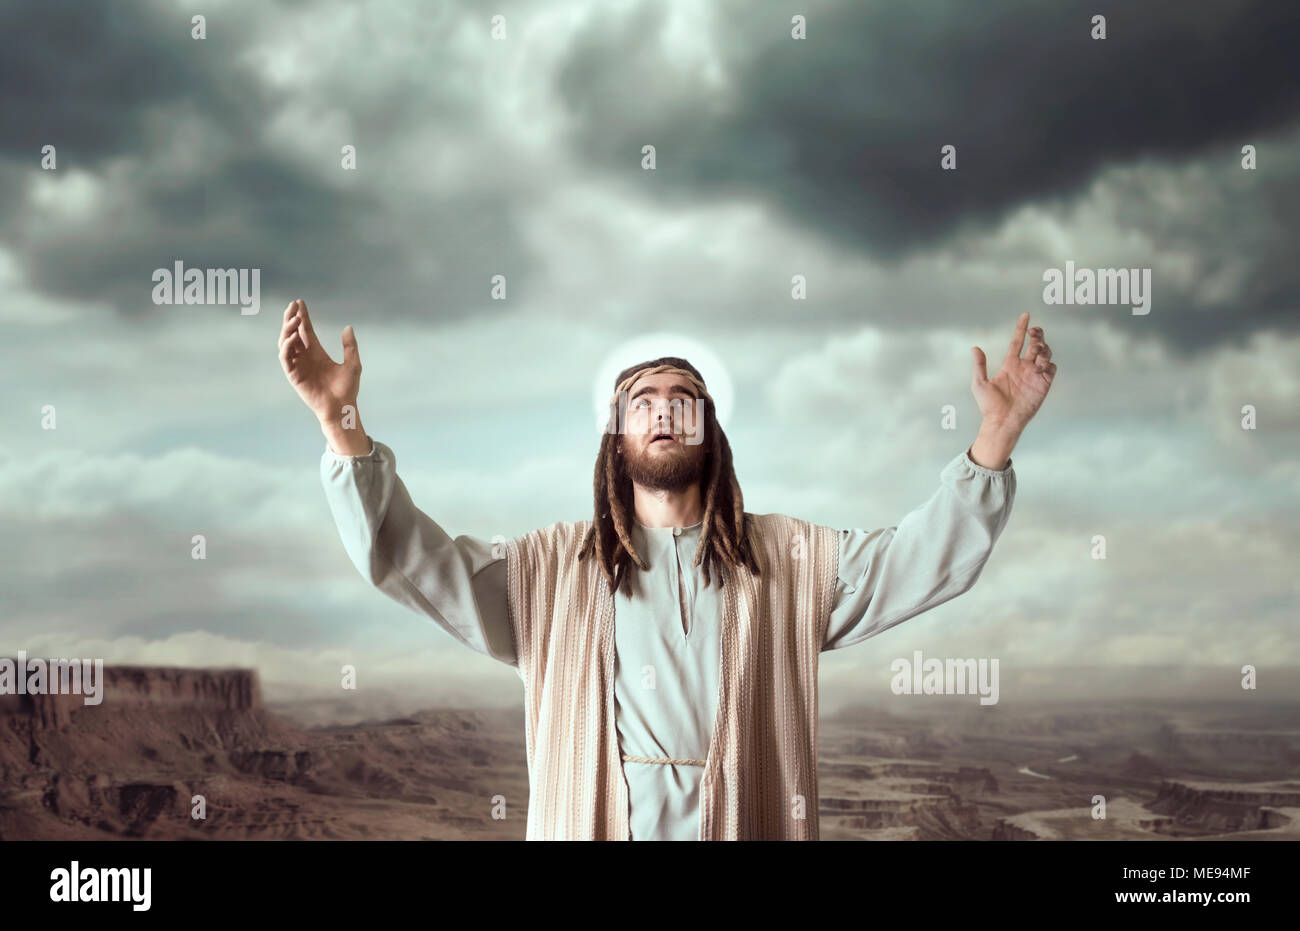 Jesus Christ in white robe praying with his hands up against cloudy sky. Strong faith in God, christianity Stock Photo